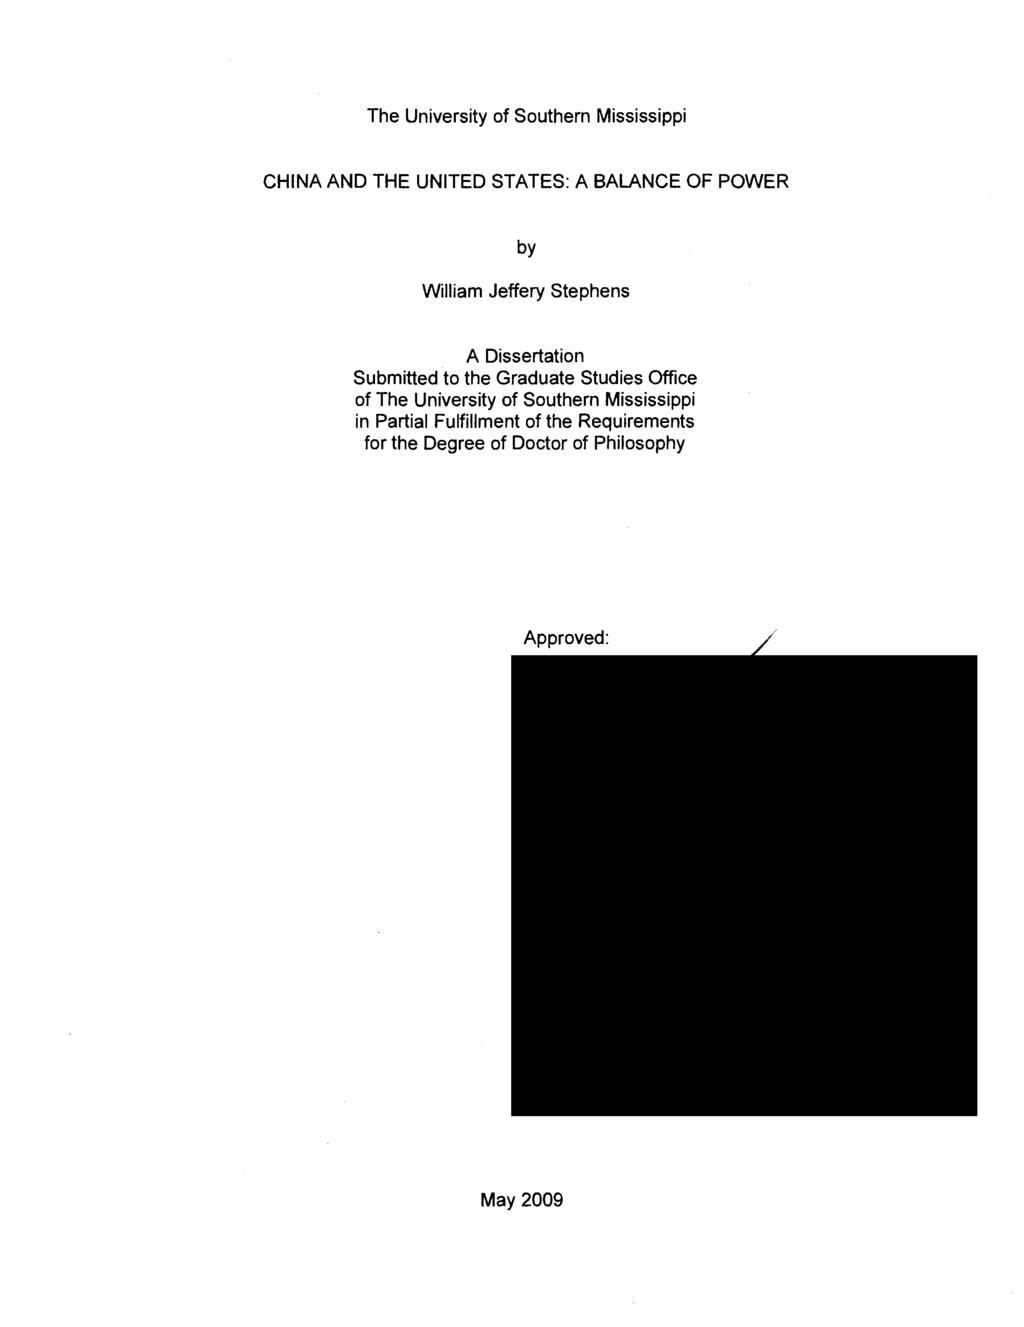 The University of Southern Mississippi CHINA AND THE UNITED STATES: A BALANCE OF POWER by William Jeffery Stephens A Dissertation Submitted to the Graduate